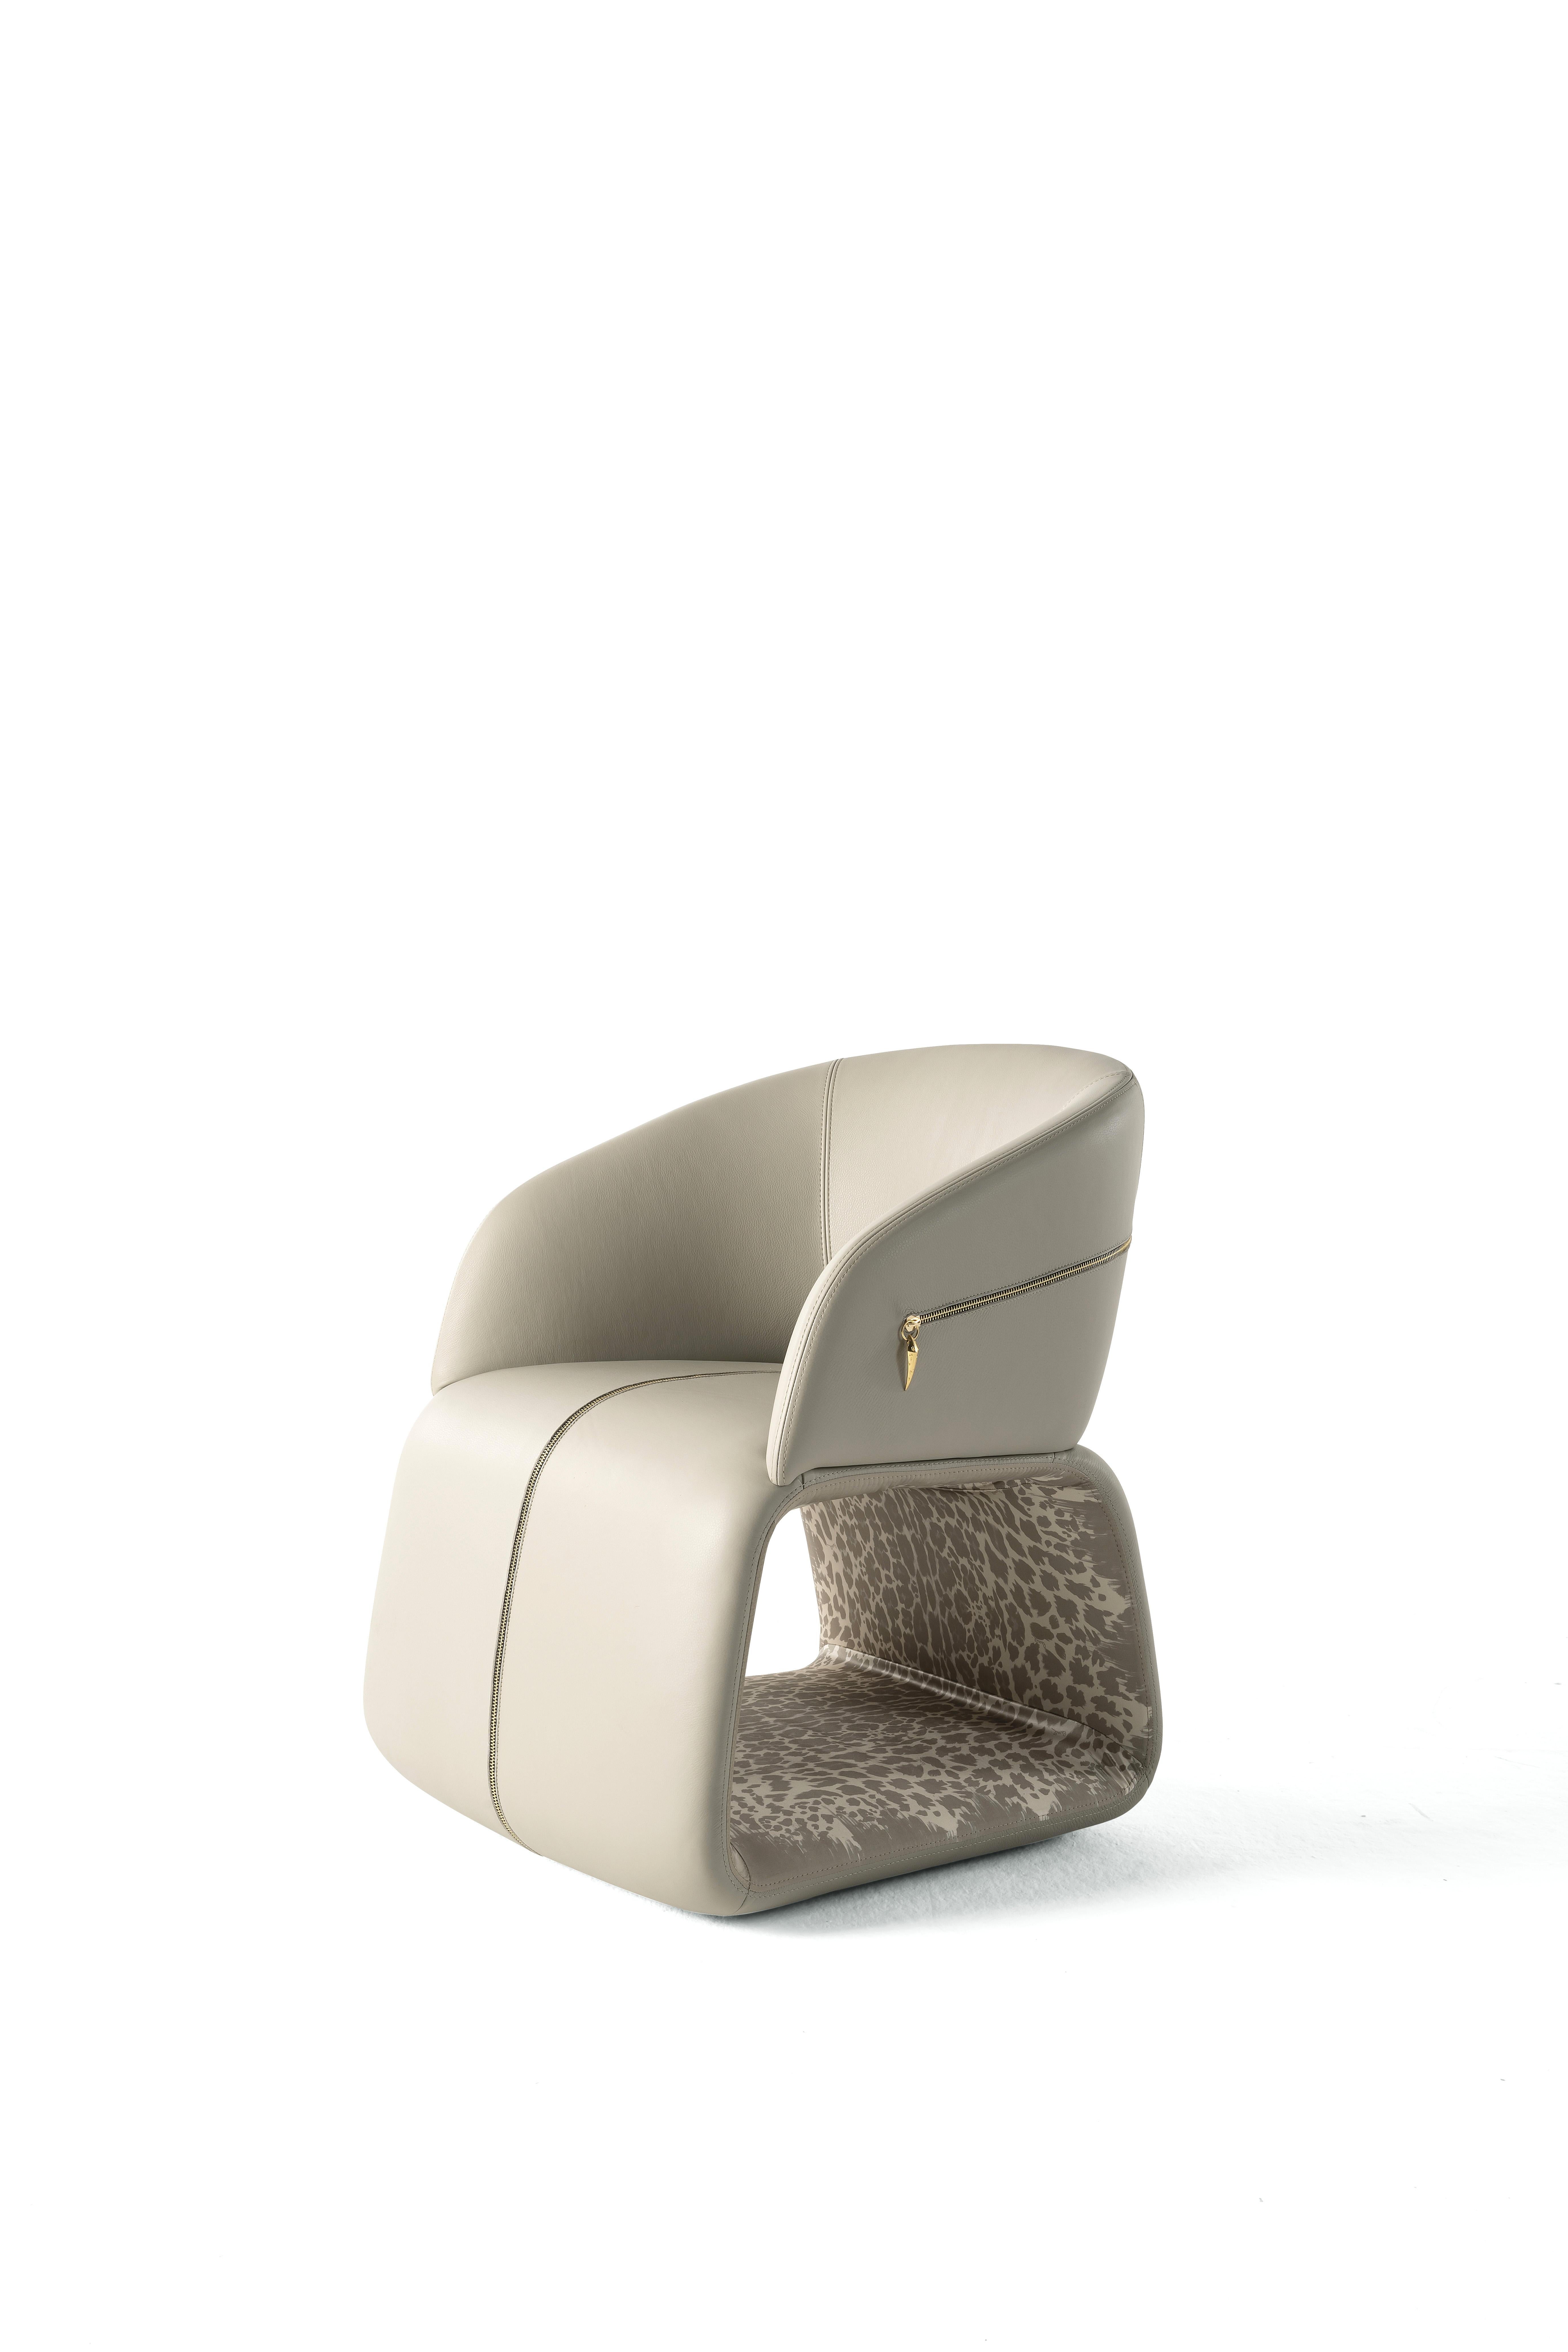 Modern 21st Century Wild Armchair in Leather by Roberto Cavalli Home Interiors For Sale